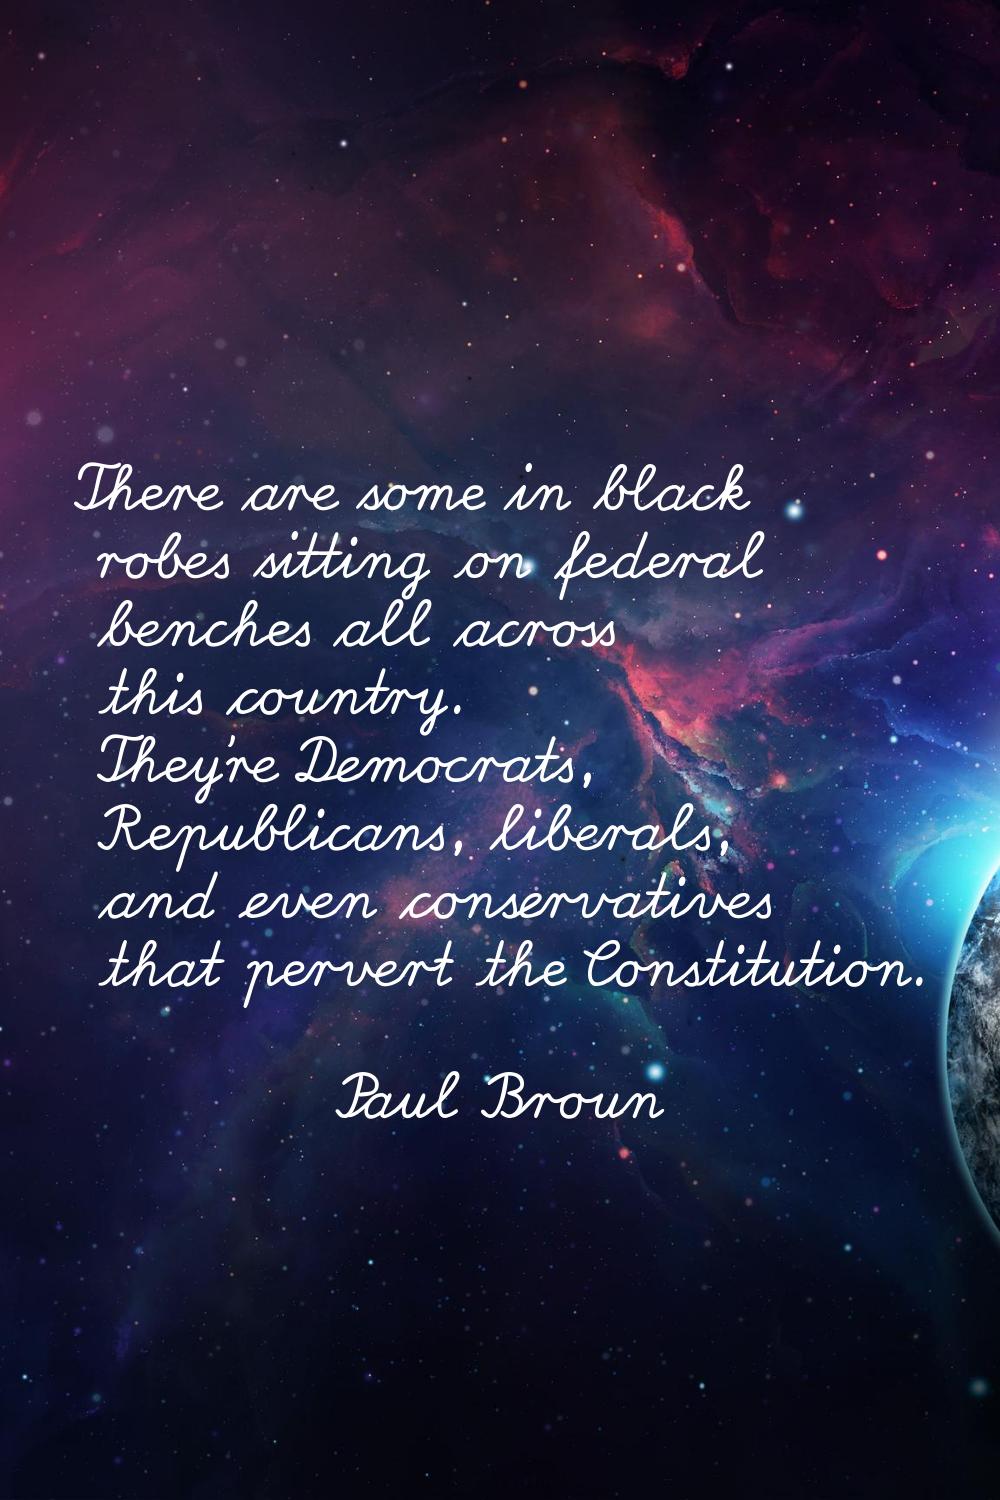 There are some in black robes sitting on federal benches all across this country. They're Democrats